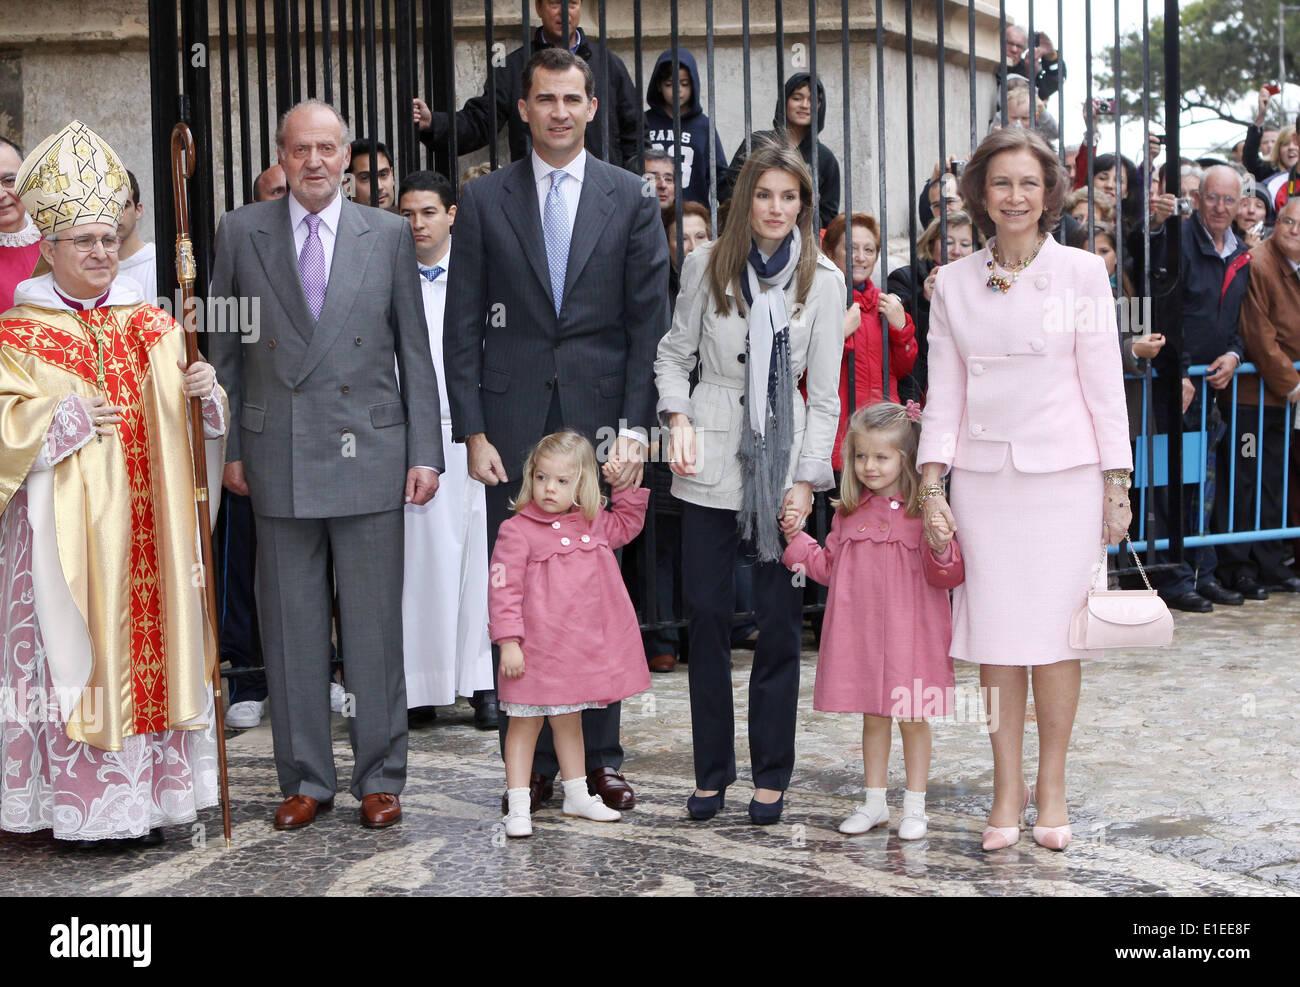 King Juan Carlos (L), Queen Sofia (R), Prince Felipe (2-L), Princess Letizia (3-R), Princess Leonor (2-R) and Princess Sofia of Spain attend an Easter Sunday church service at the cathedral in Palma Mallorca, Spain, 04 April 2010. Photo: Patrick van Katwijk Stock Photo